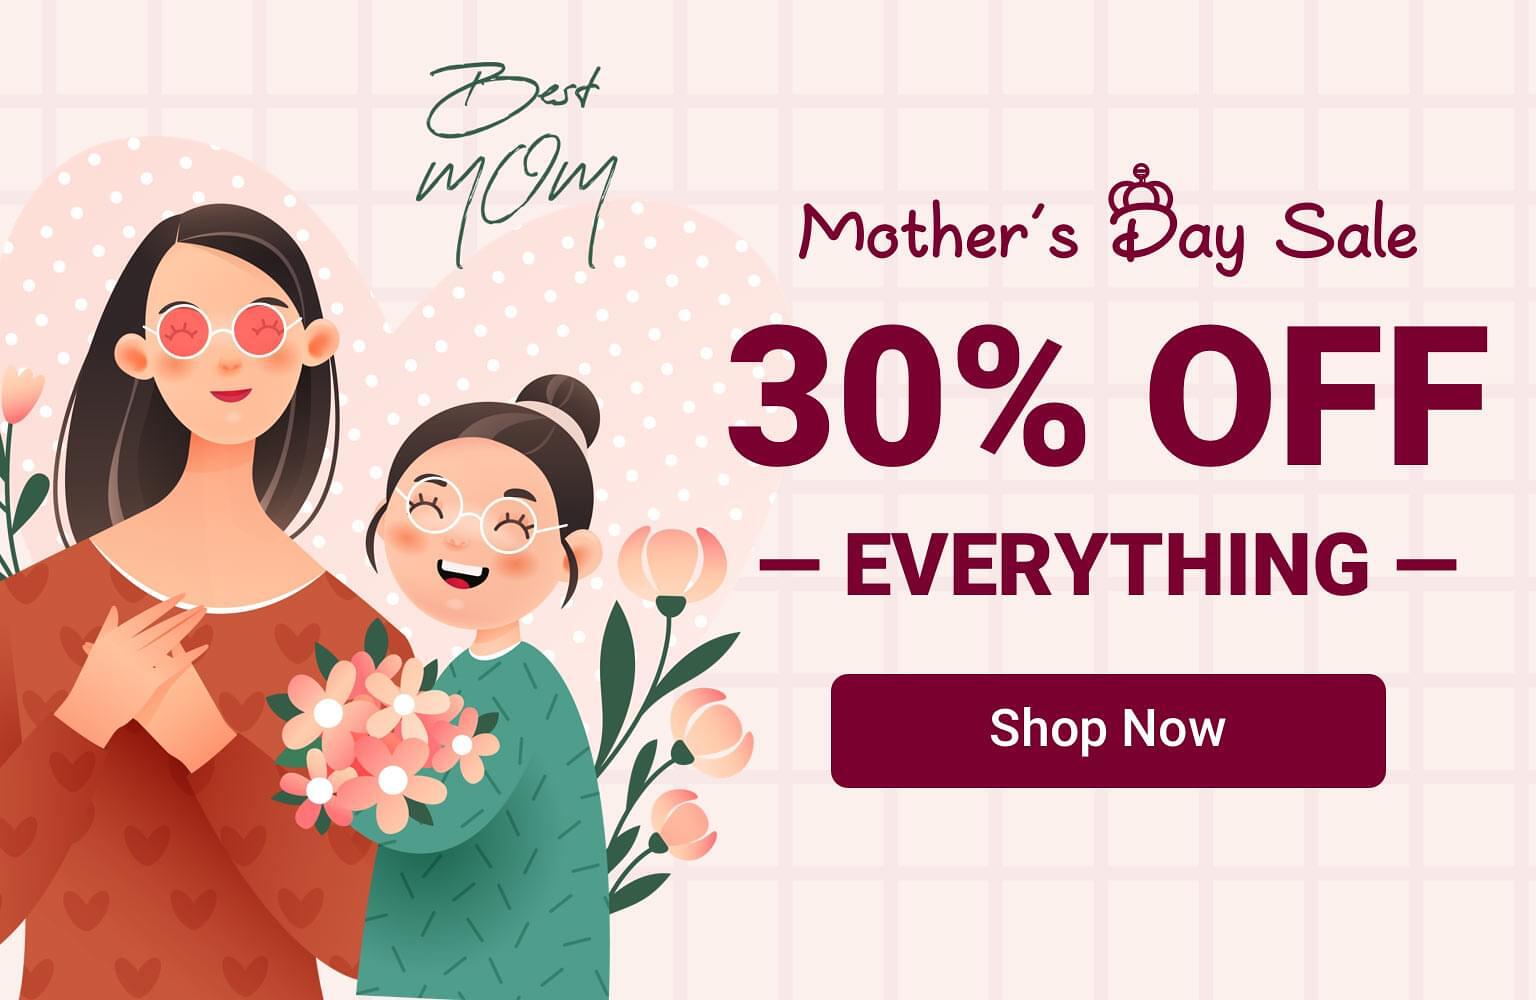 Mother's Day Sale: 30% Off ALL Eyewear